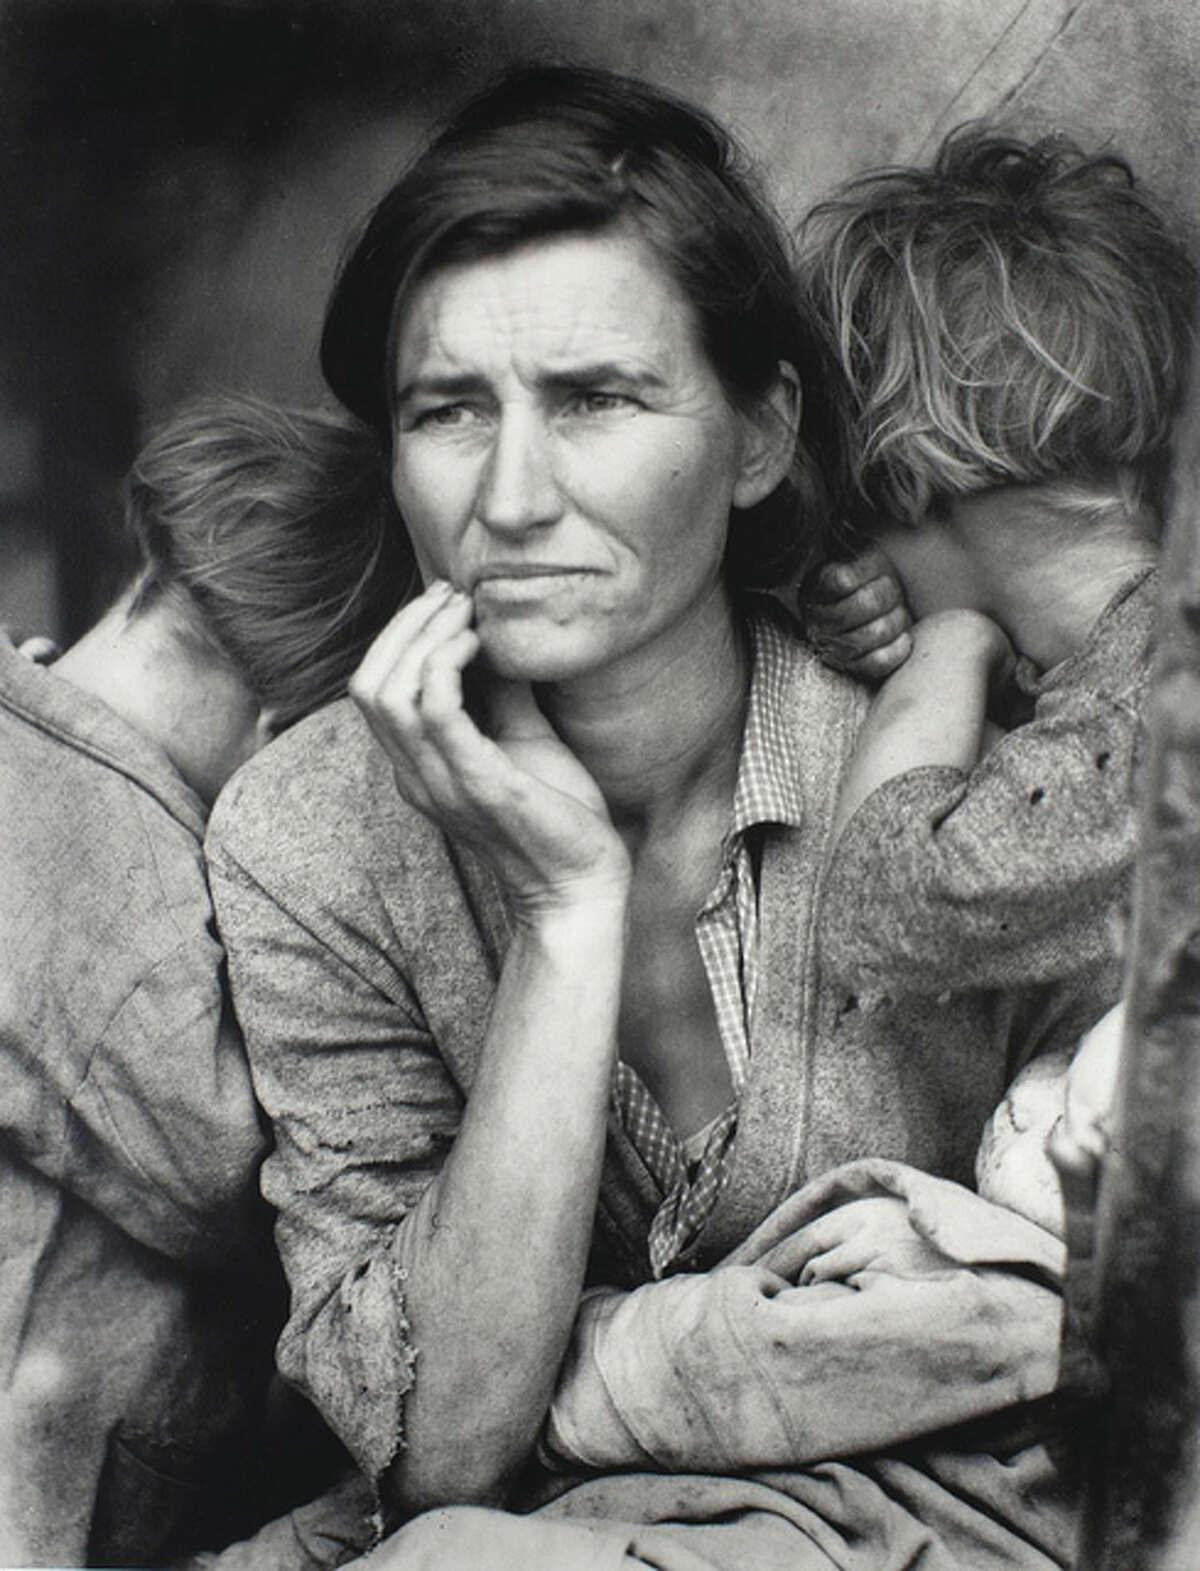 Dorothea Lange, American, 1895–1965; Migrant Mother, Nipomo, CA, 1936, printed c.1952; gelatin silver print; image: 13 1/2 x 10 1/2 inches; Saint Louis Art Museum, Gift of Charles A. Newman honoring Elizabeth, his wife and treasured guide to art 11:2014